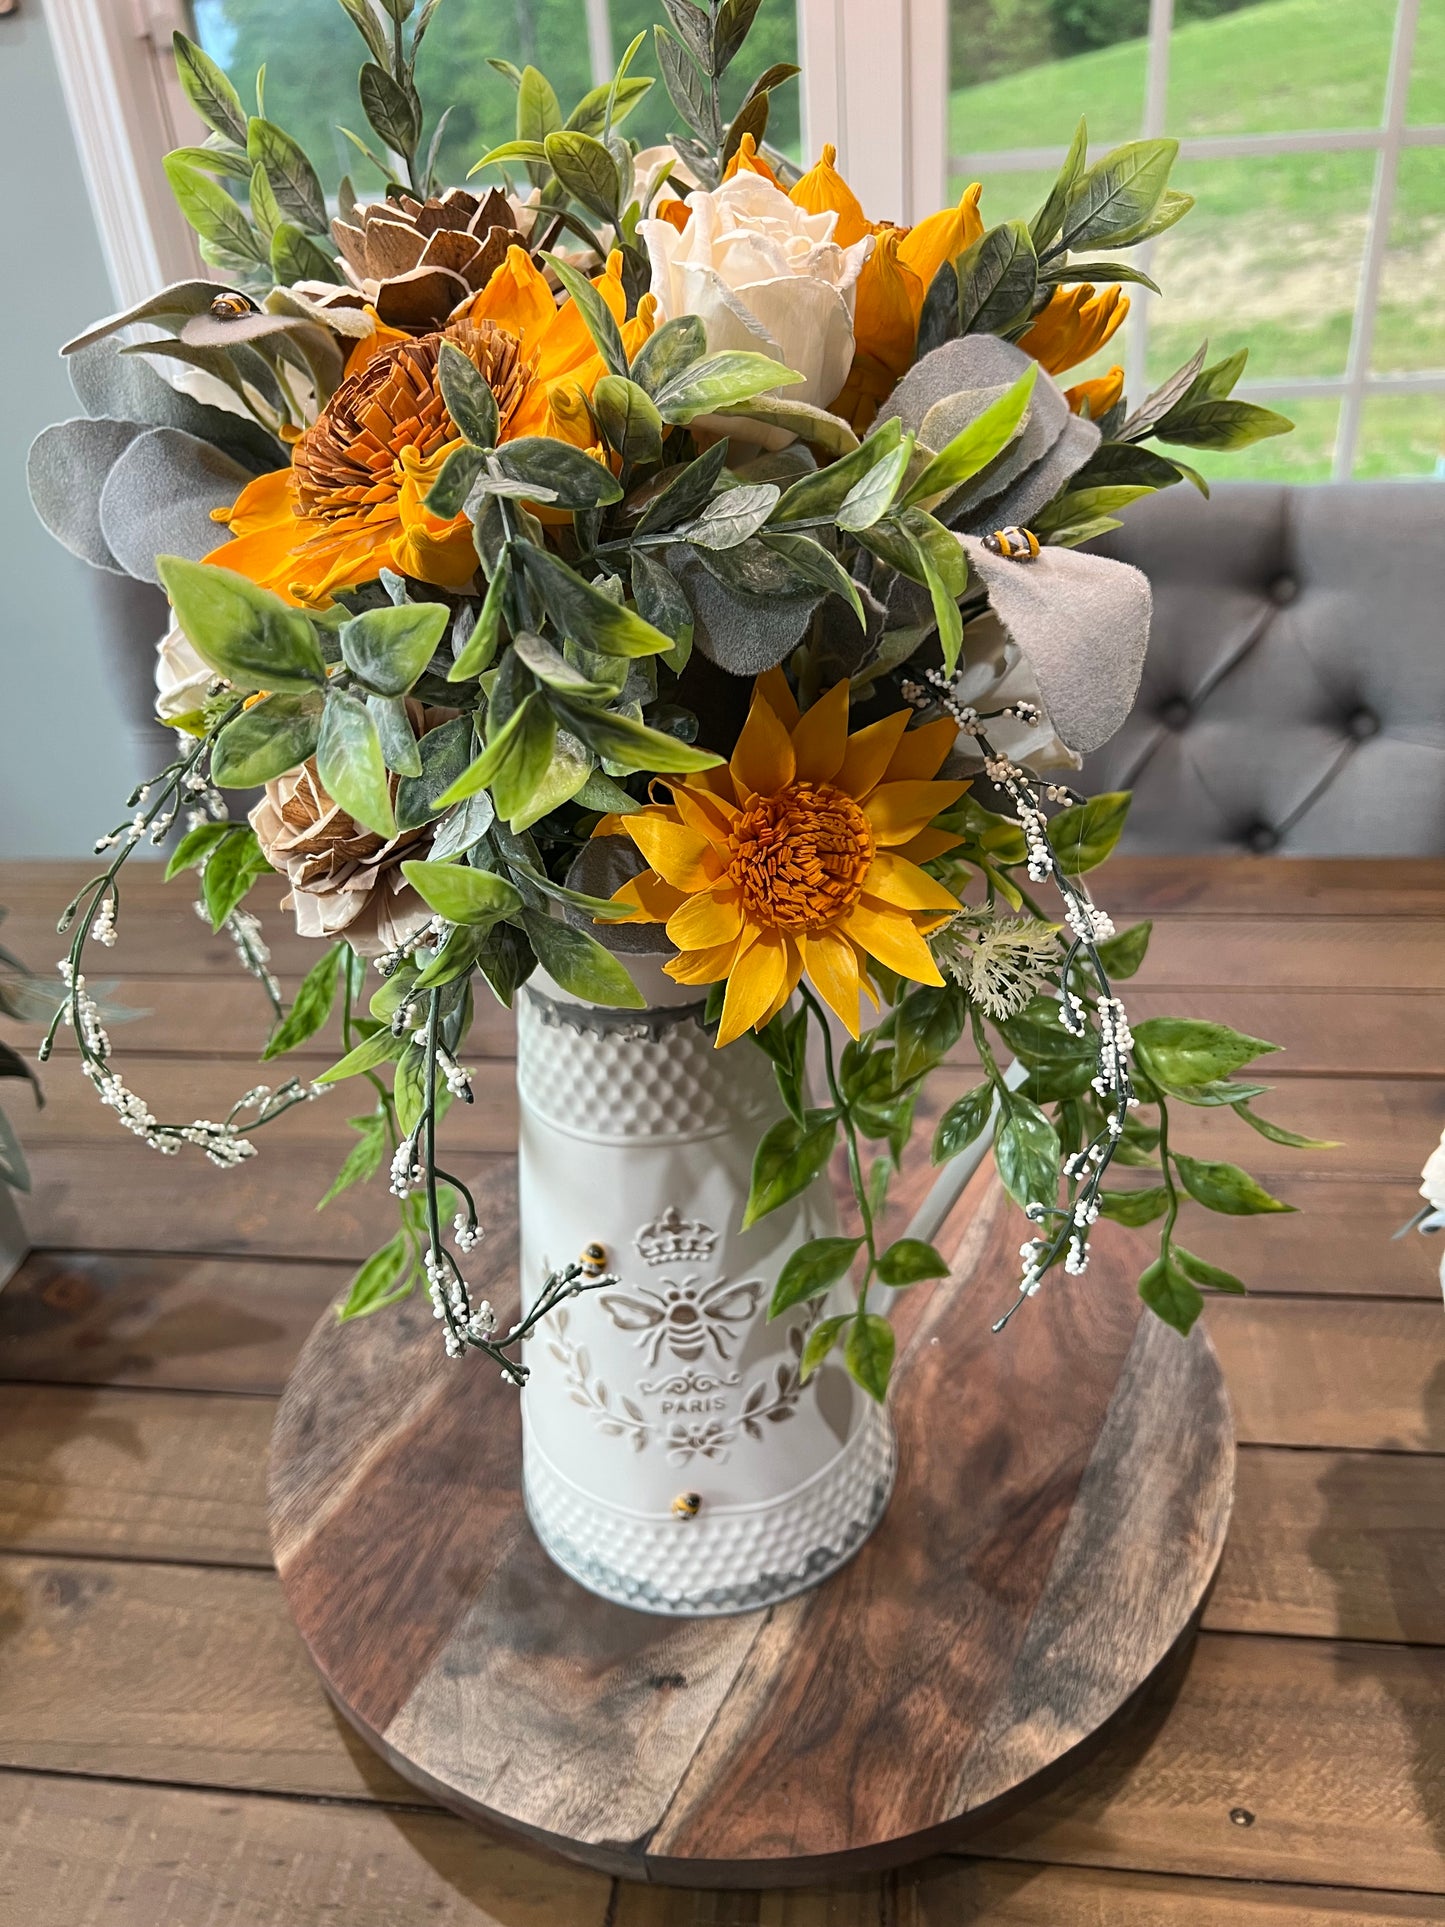 TALL PITCHER WITH SUNFLOWERS AND WHITE ROSES